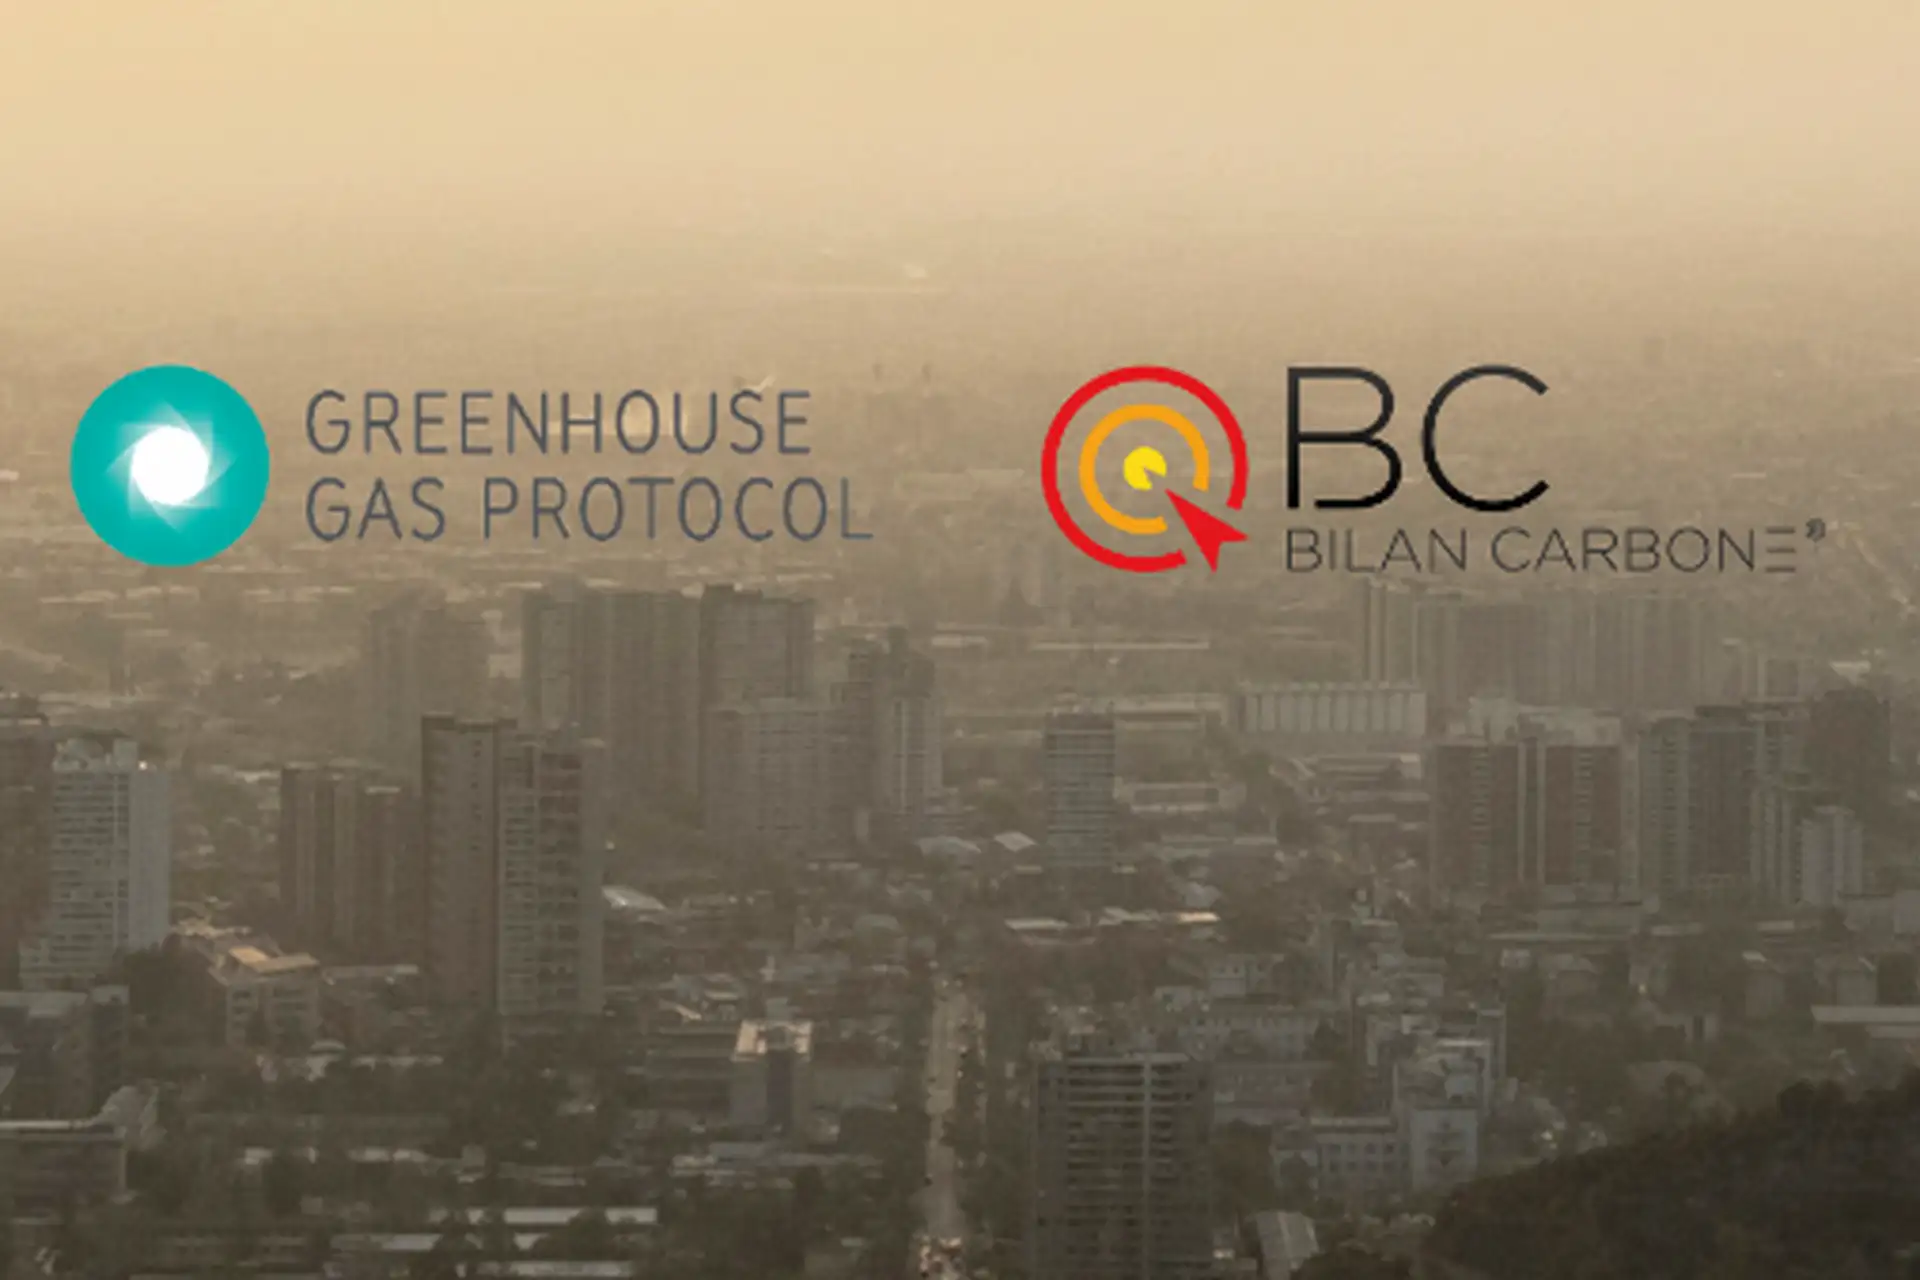 The differences between GHG Protocol & Bilan Carbone